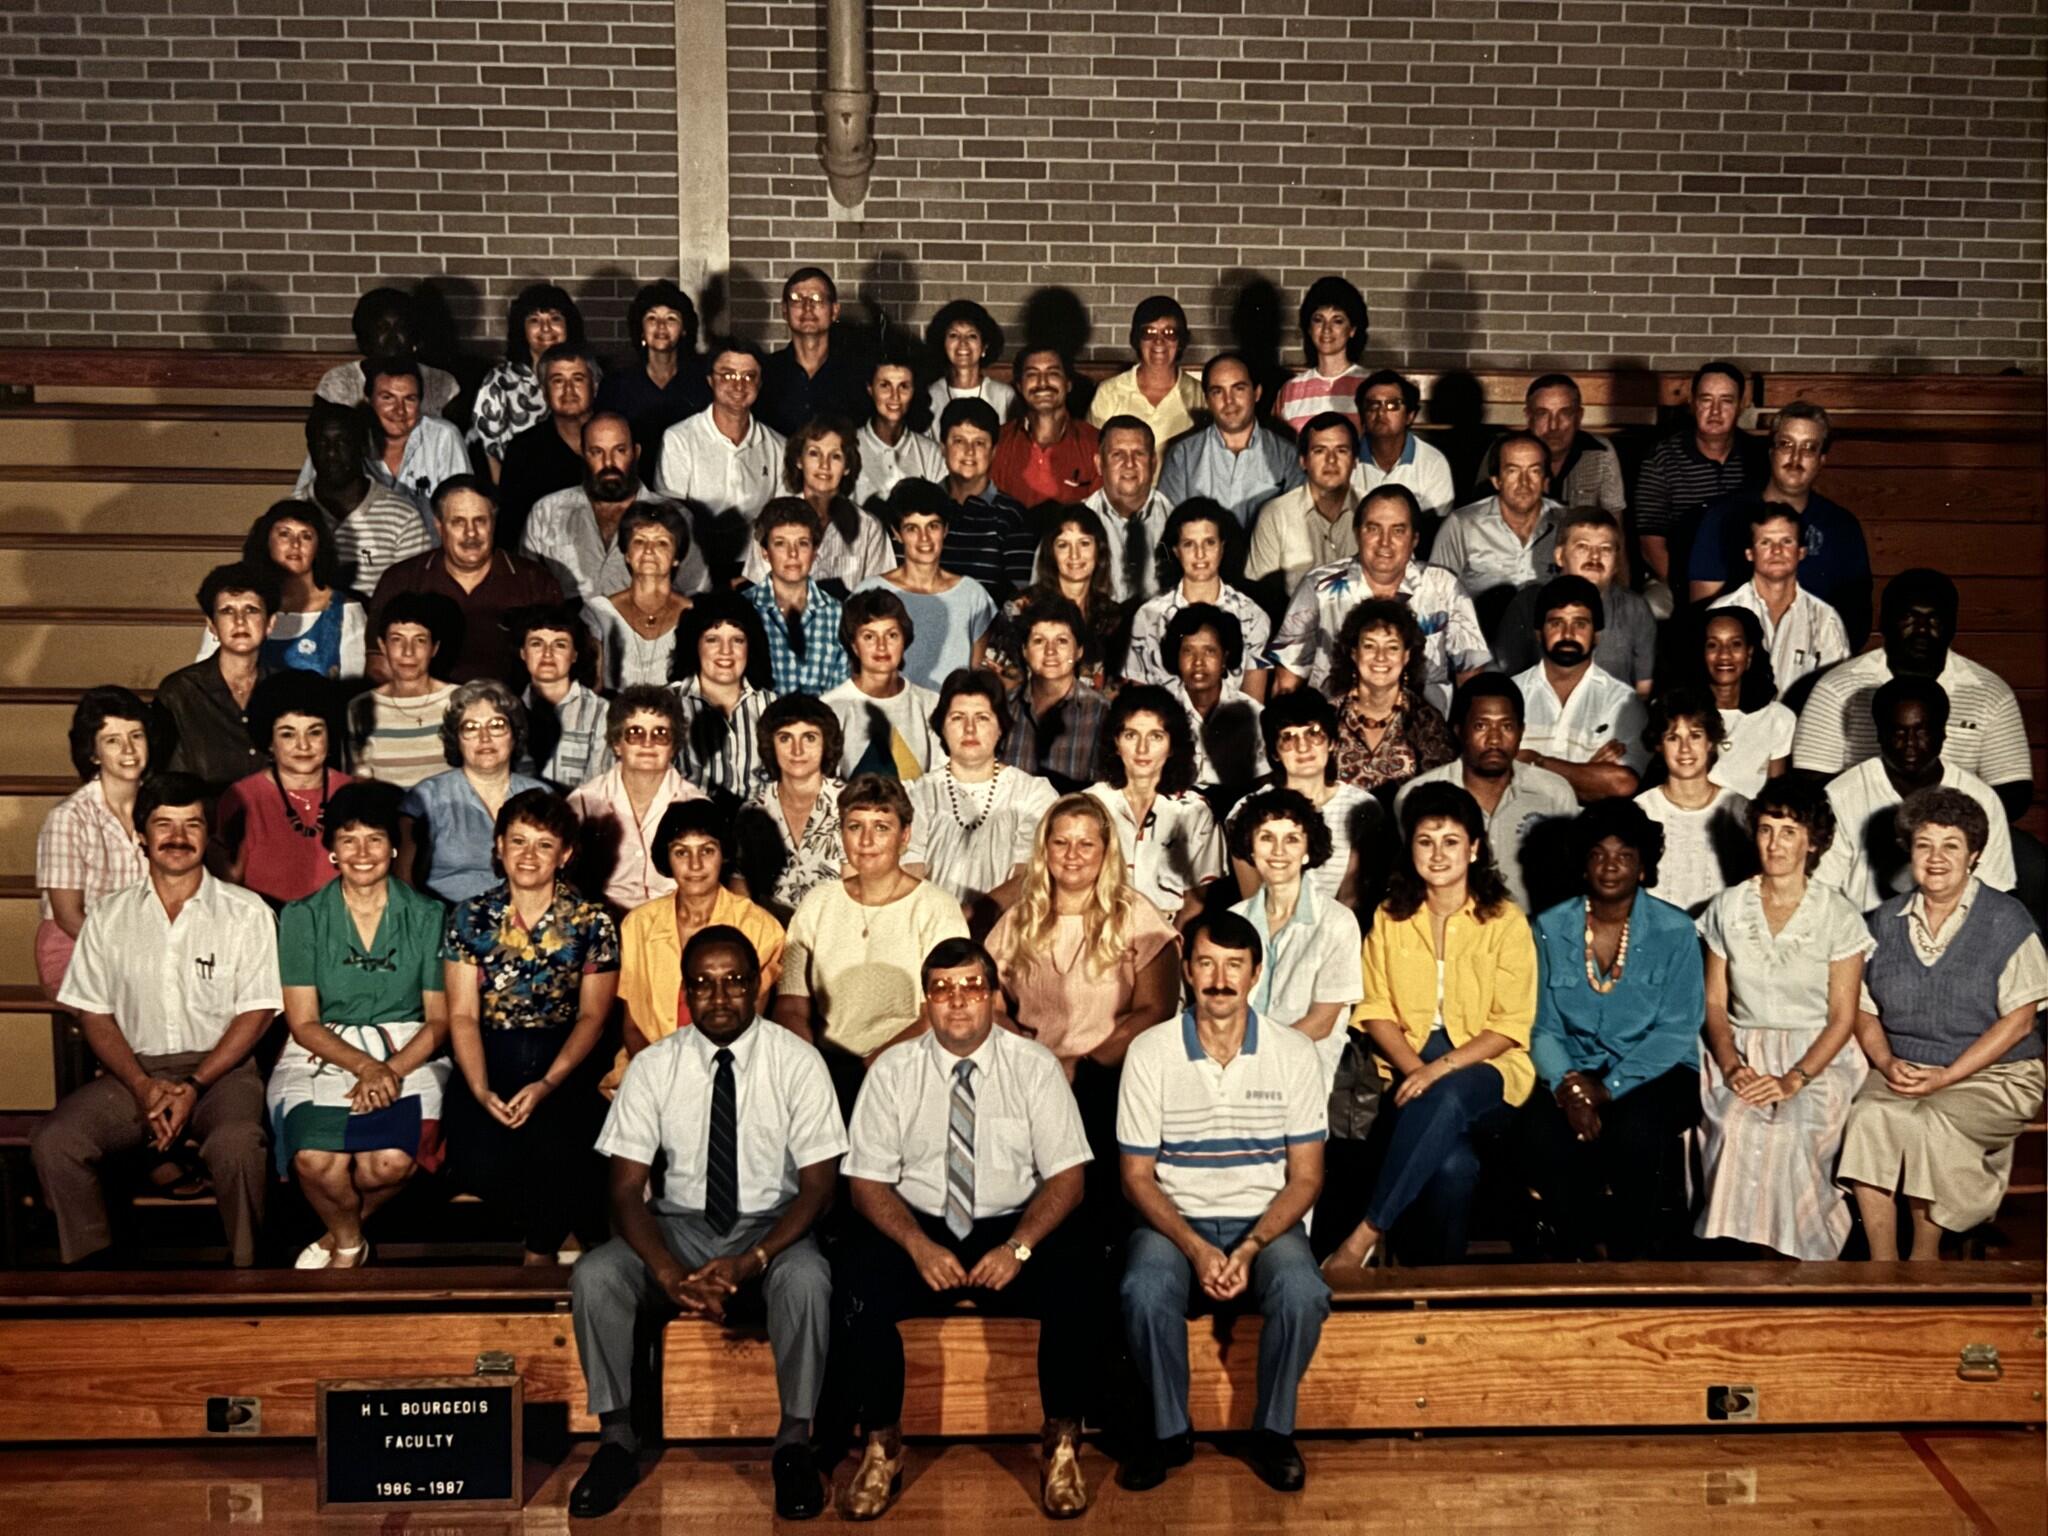 Faculty Picture 1986